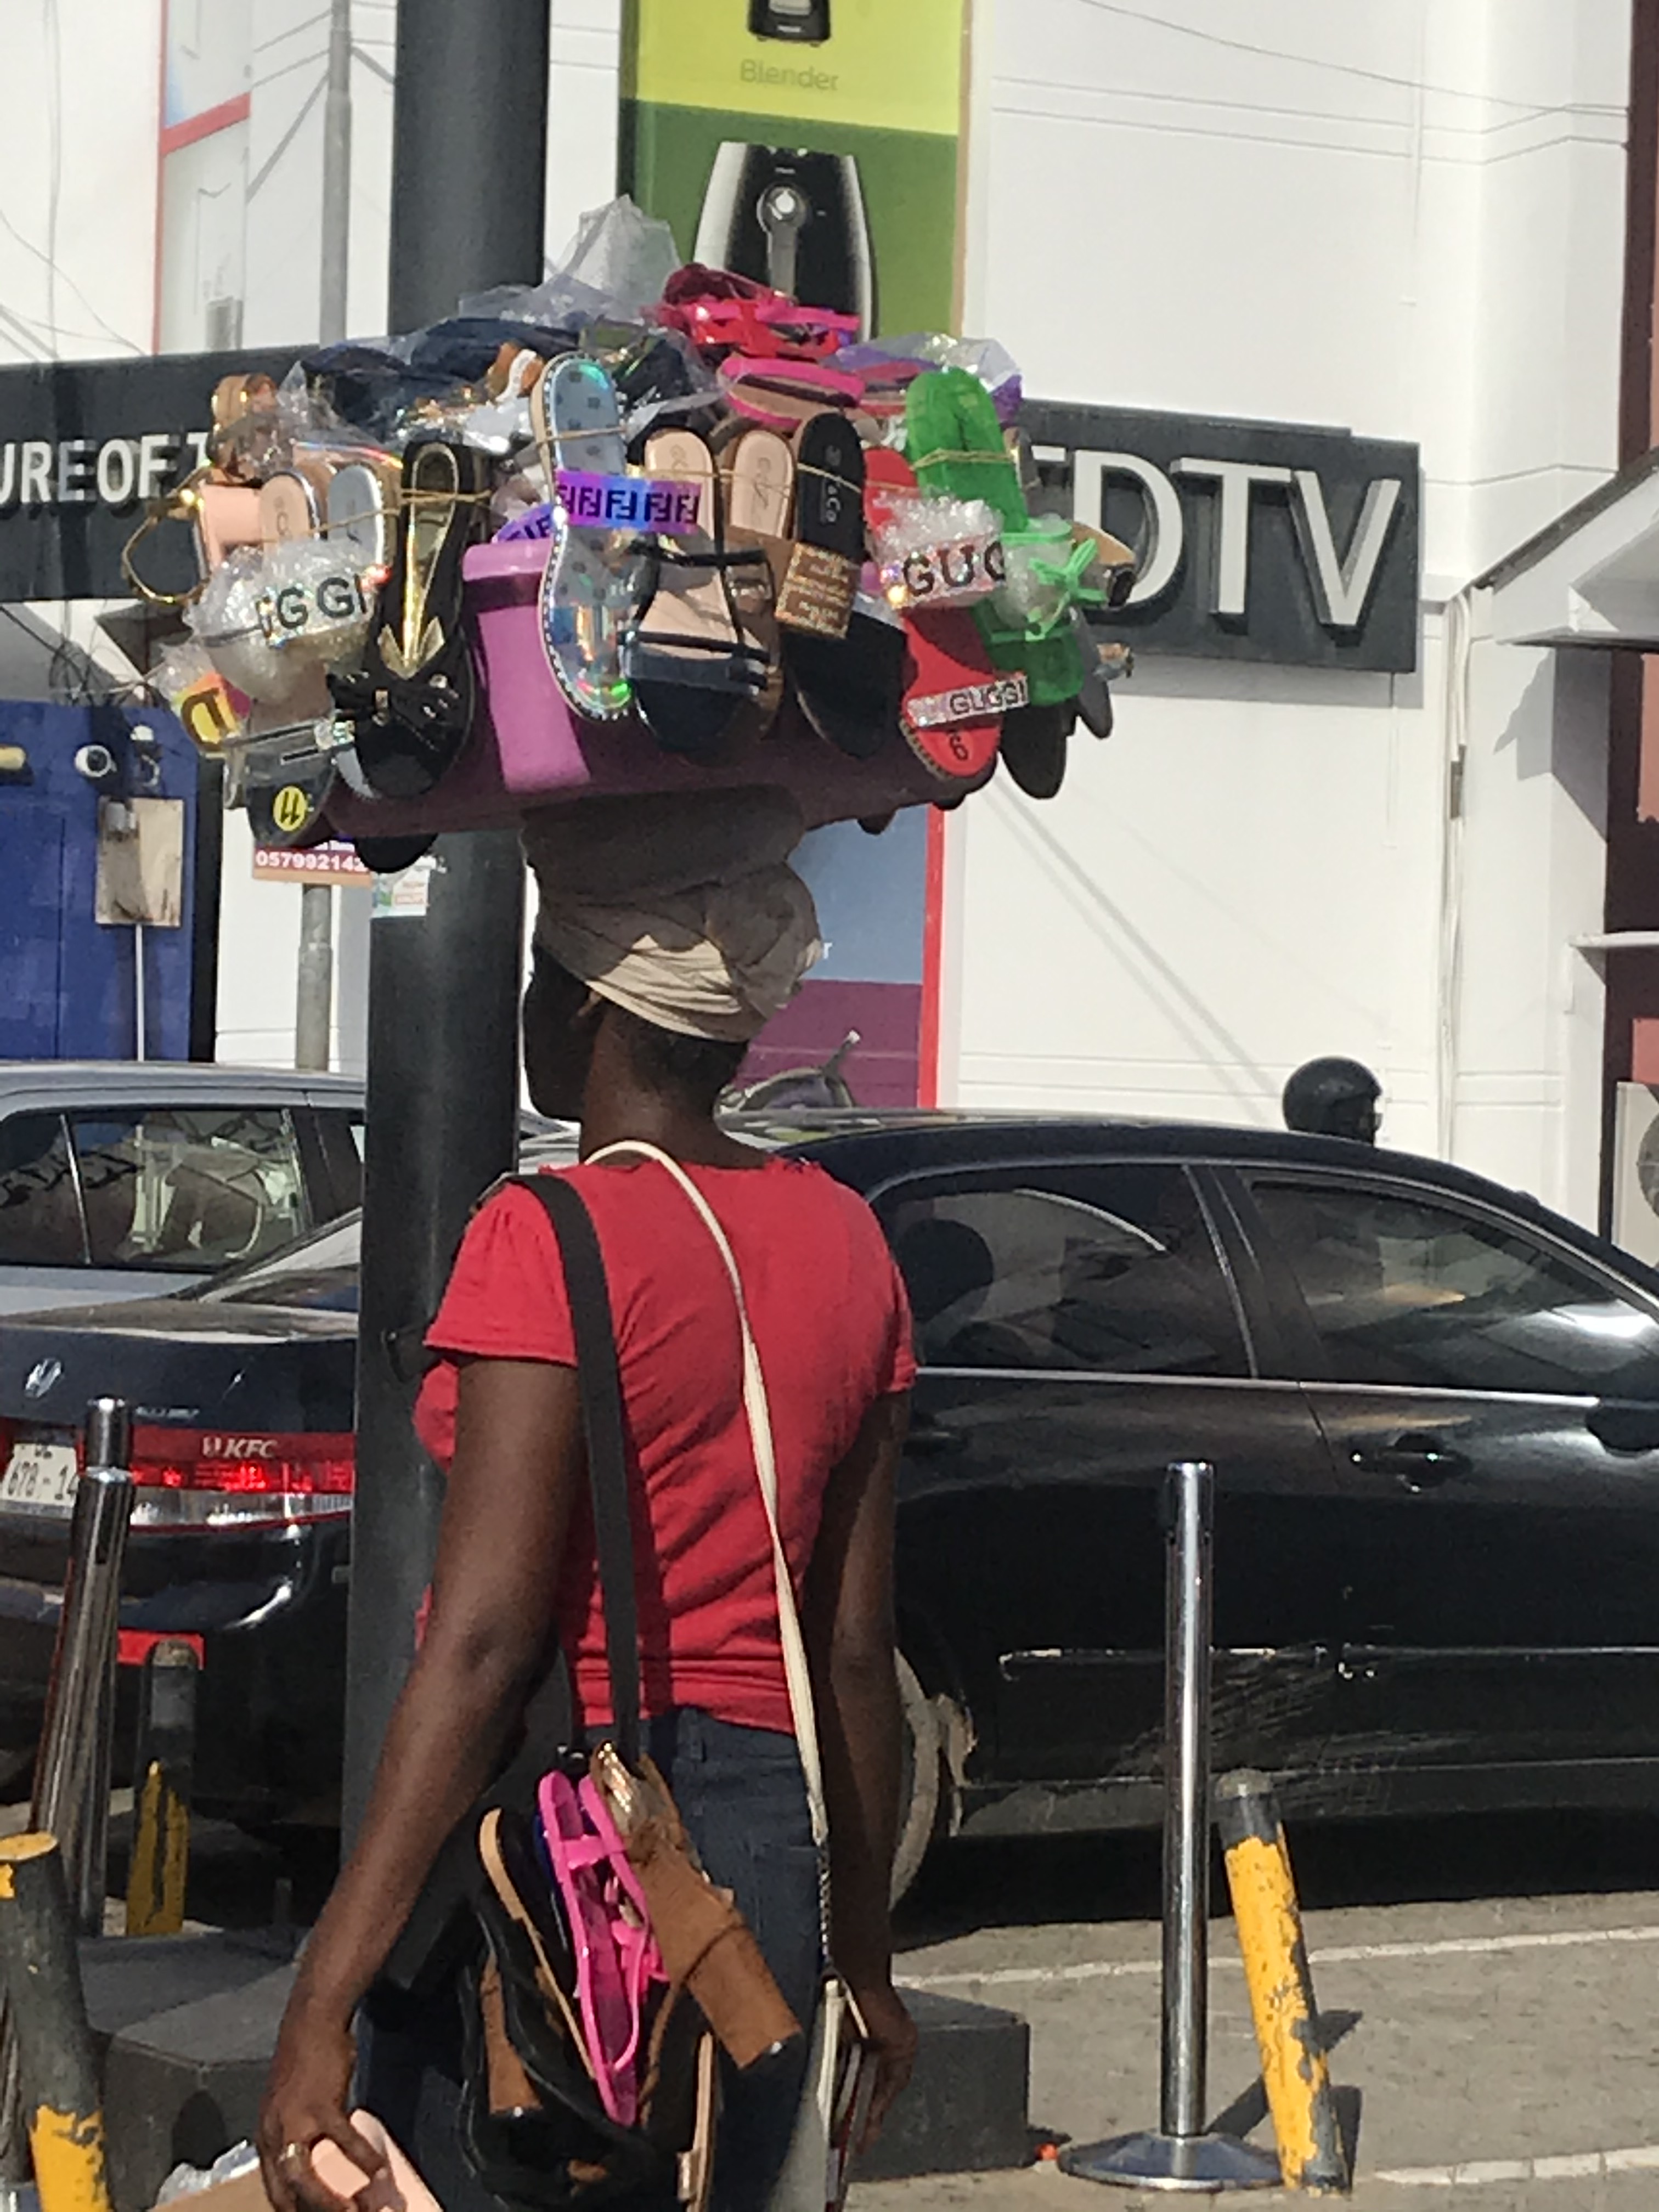 Knock off Gucci sandals being sold on Accra's Oxford Street